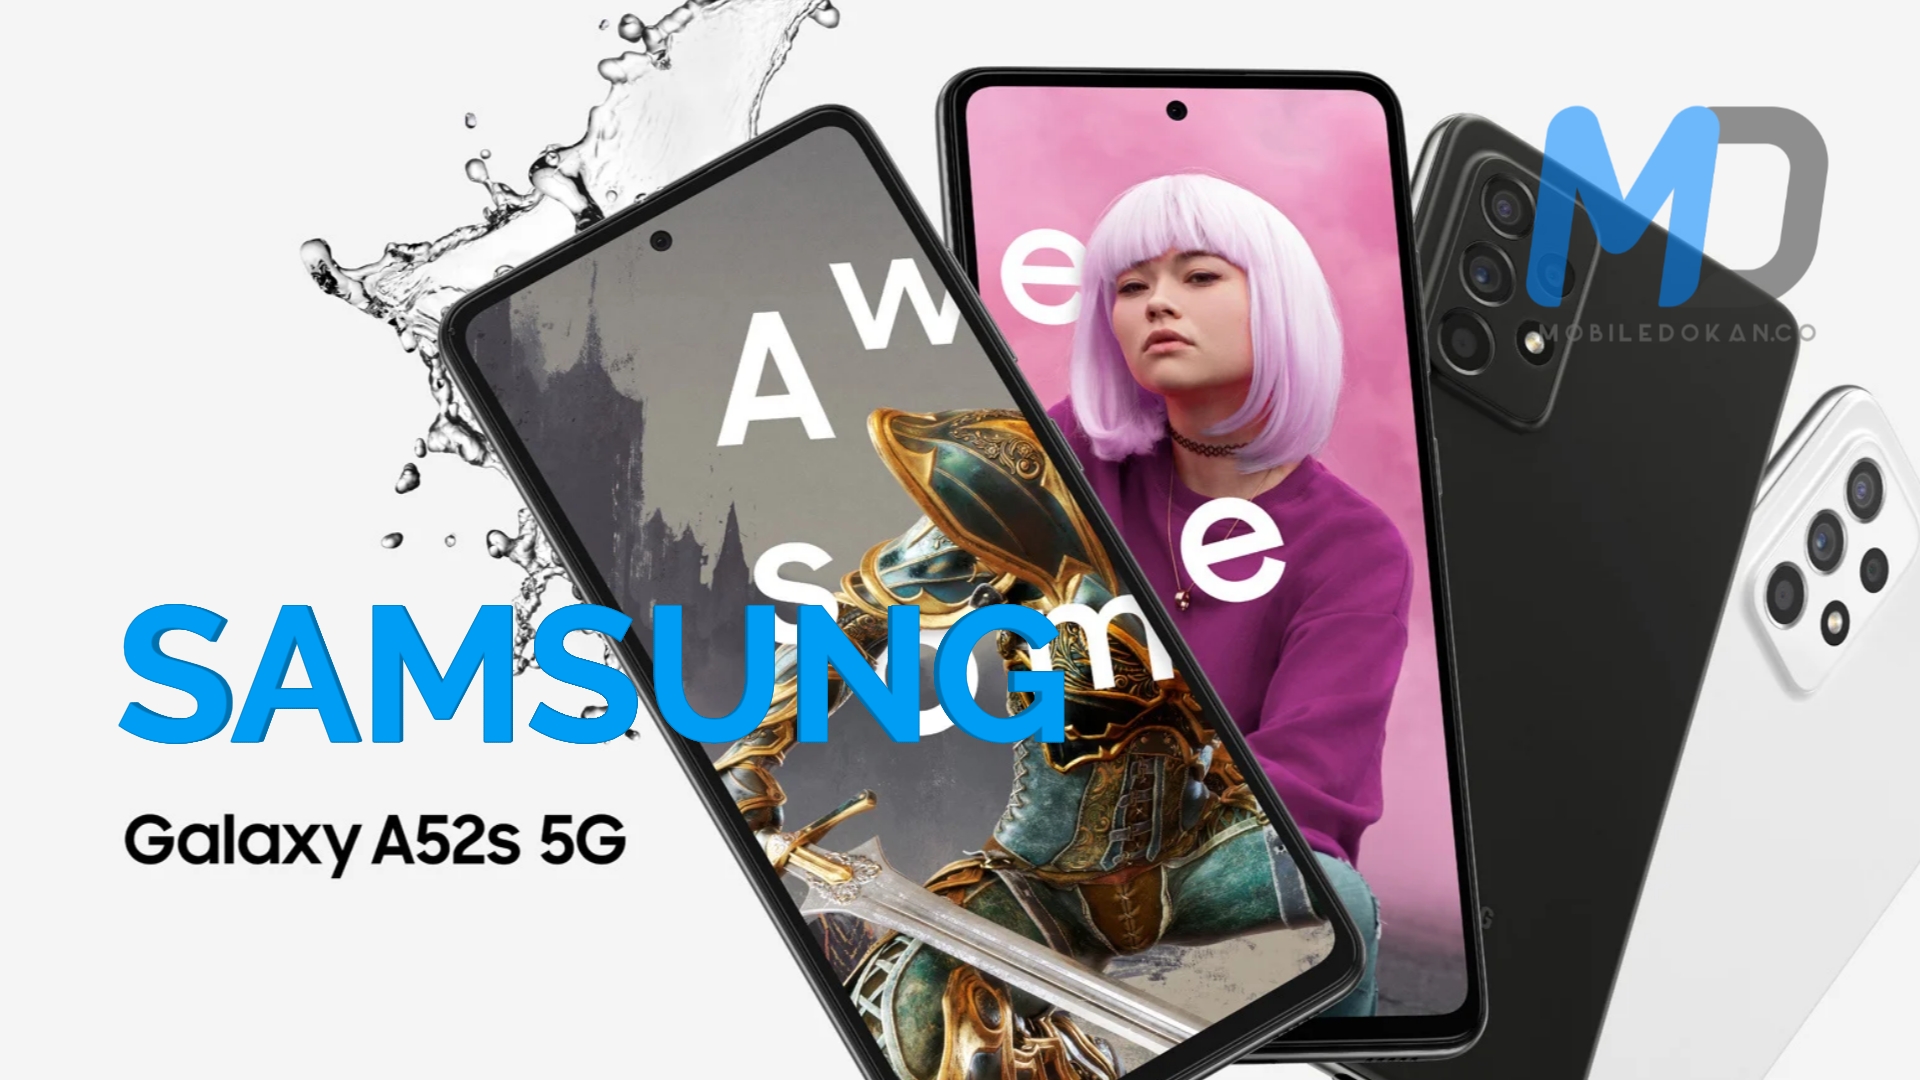 Samsung Galaxy A52s 5G Specifications and Features, price in India ₹35,999